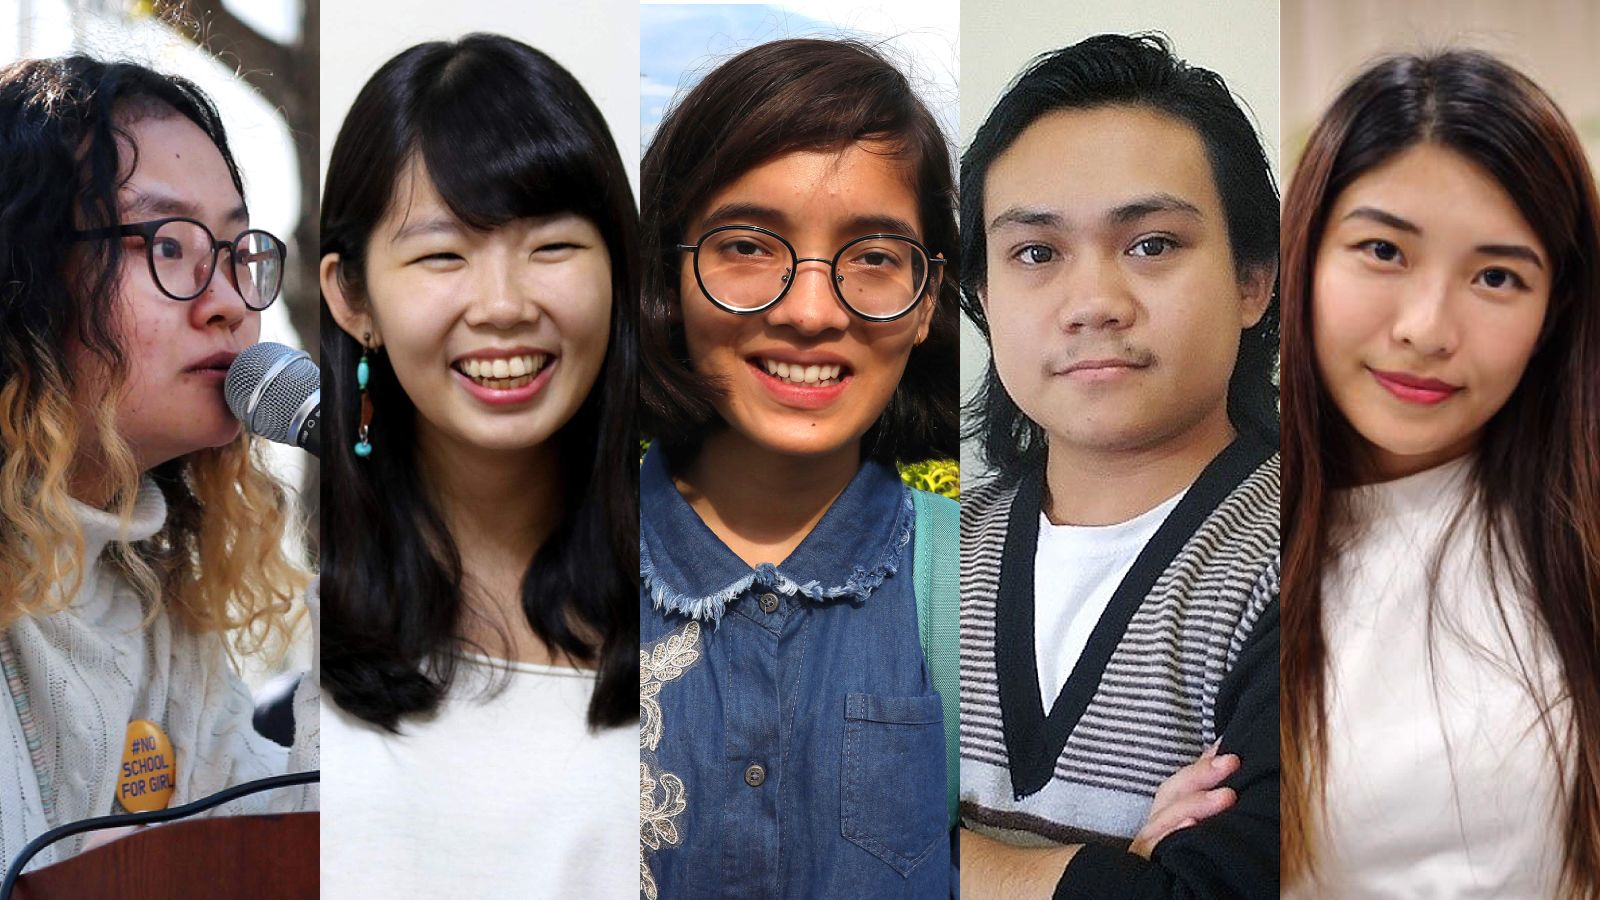 Korean Teen Girls - Meet 5 young activists who drove change in Asia this year | CNN